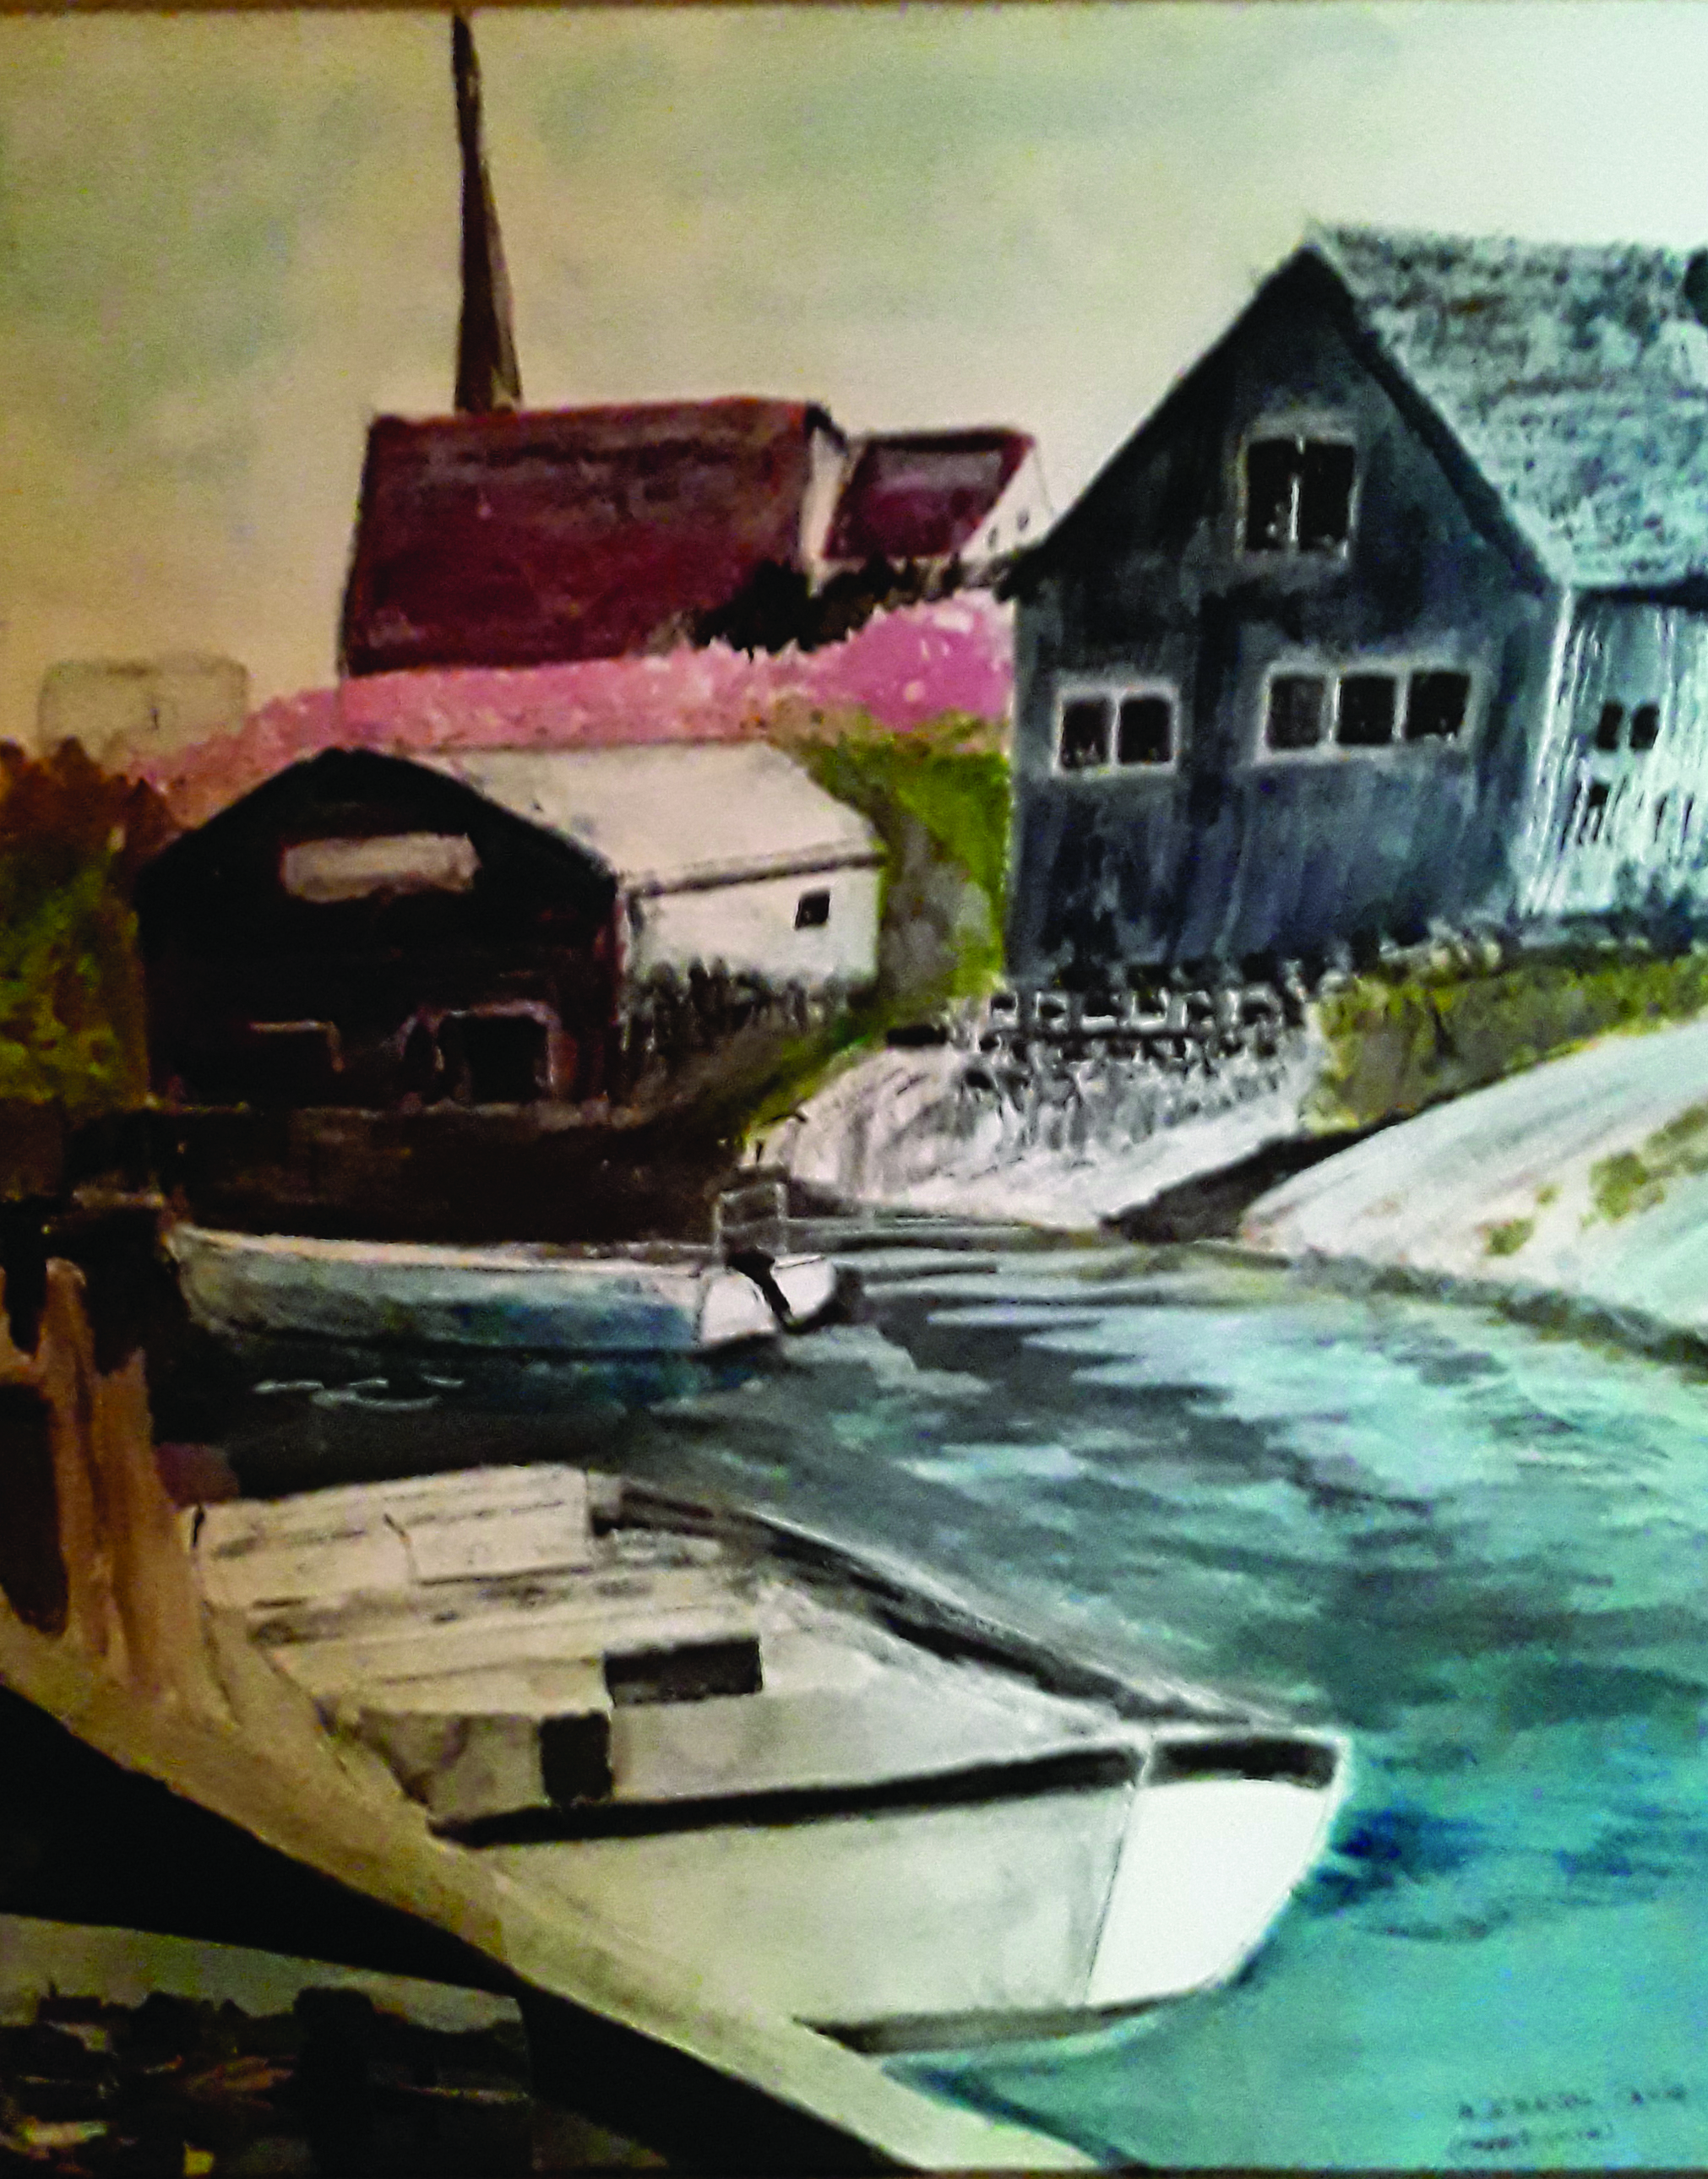 Richard Everl's painting of boat dock and buildins